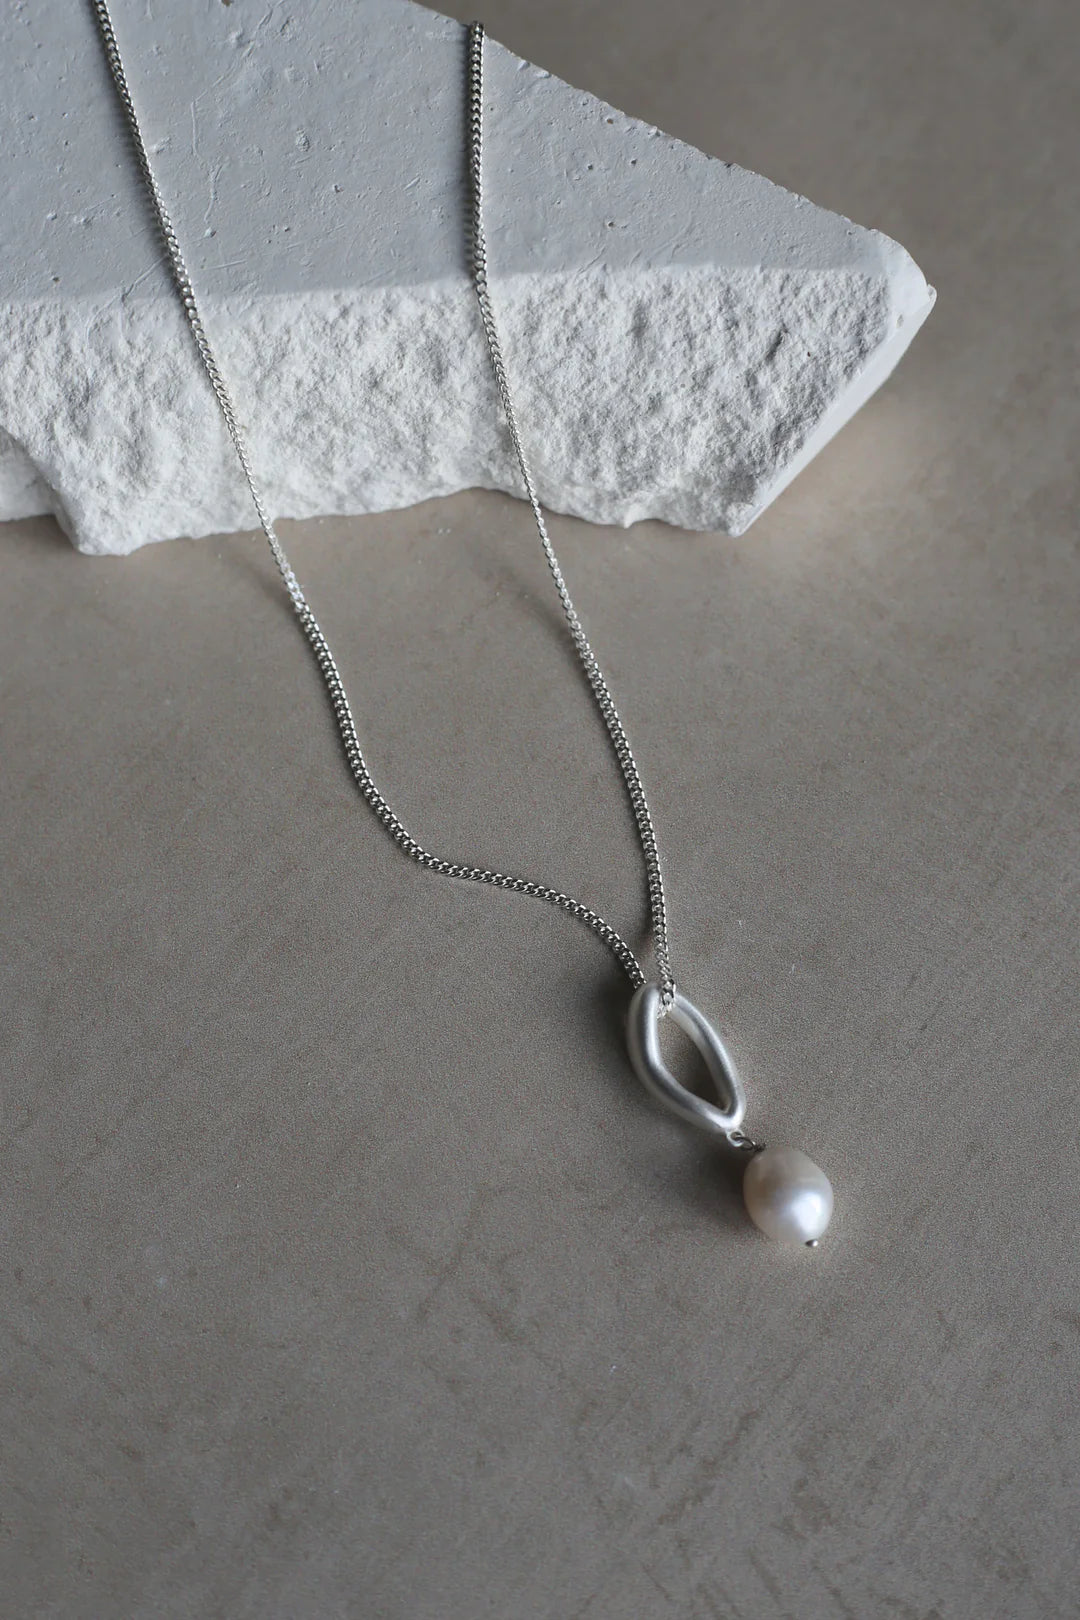 Tranquil Silver Pearl Necklace